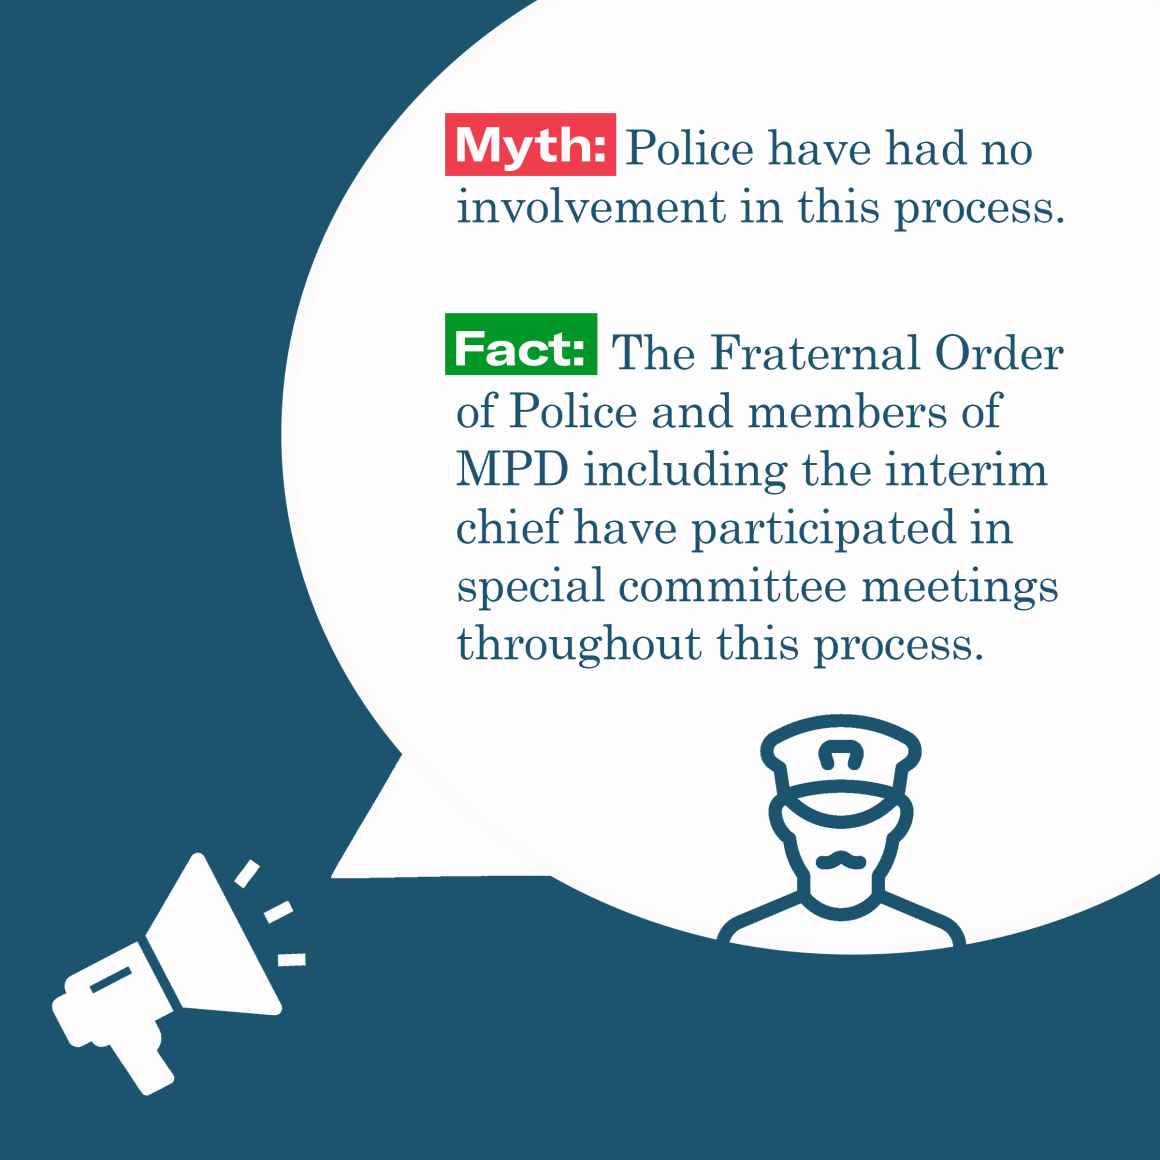 Myth: Police have had no involvement in the process. Fact; The FOP and members of MP have attended special meetings throughout the process. 